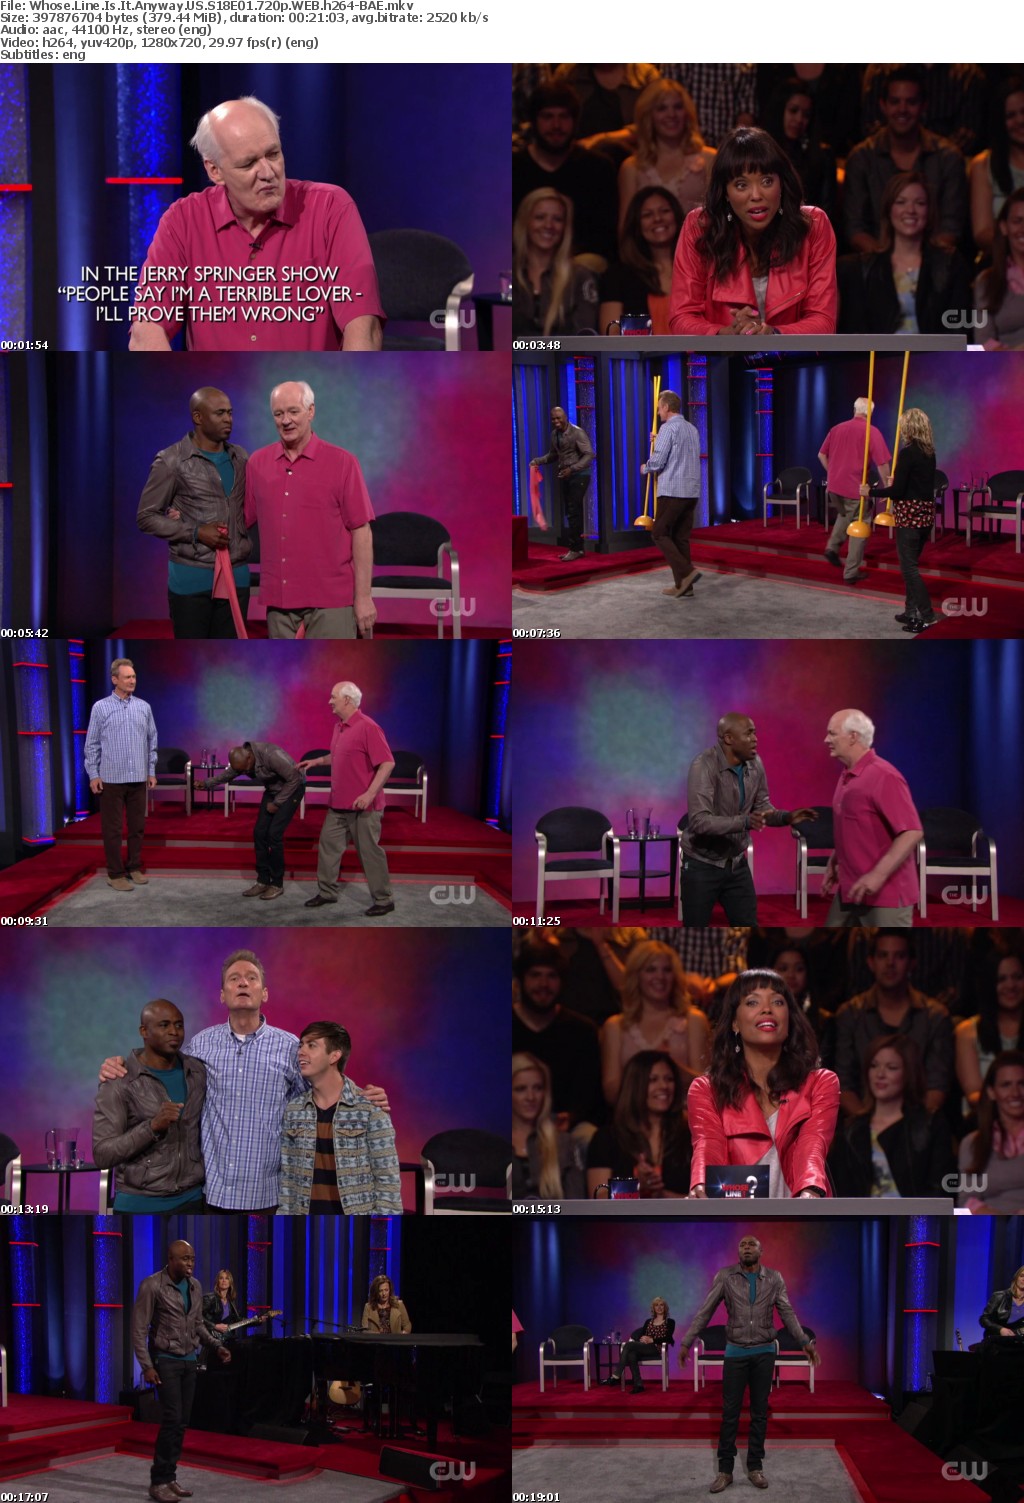 Whose Line Is It Anyway US S18E01 720p WEB h264-BAE